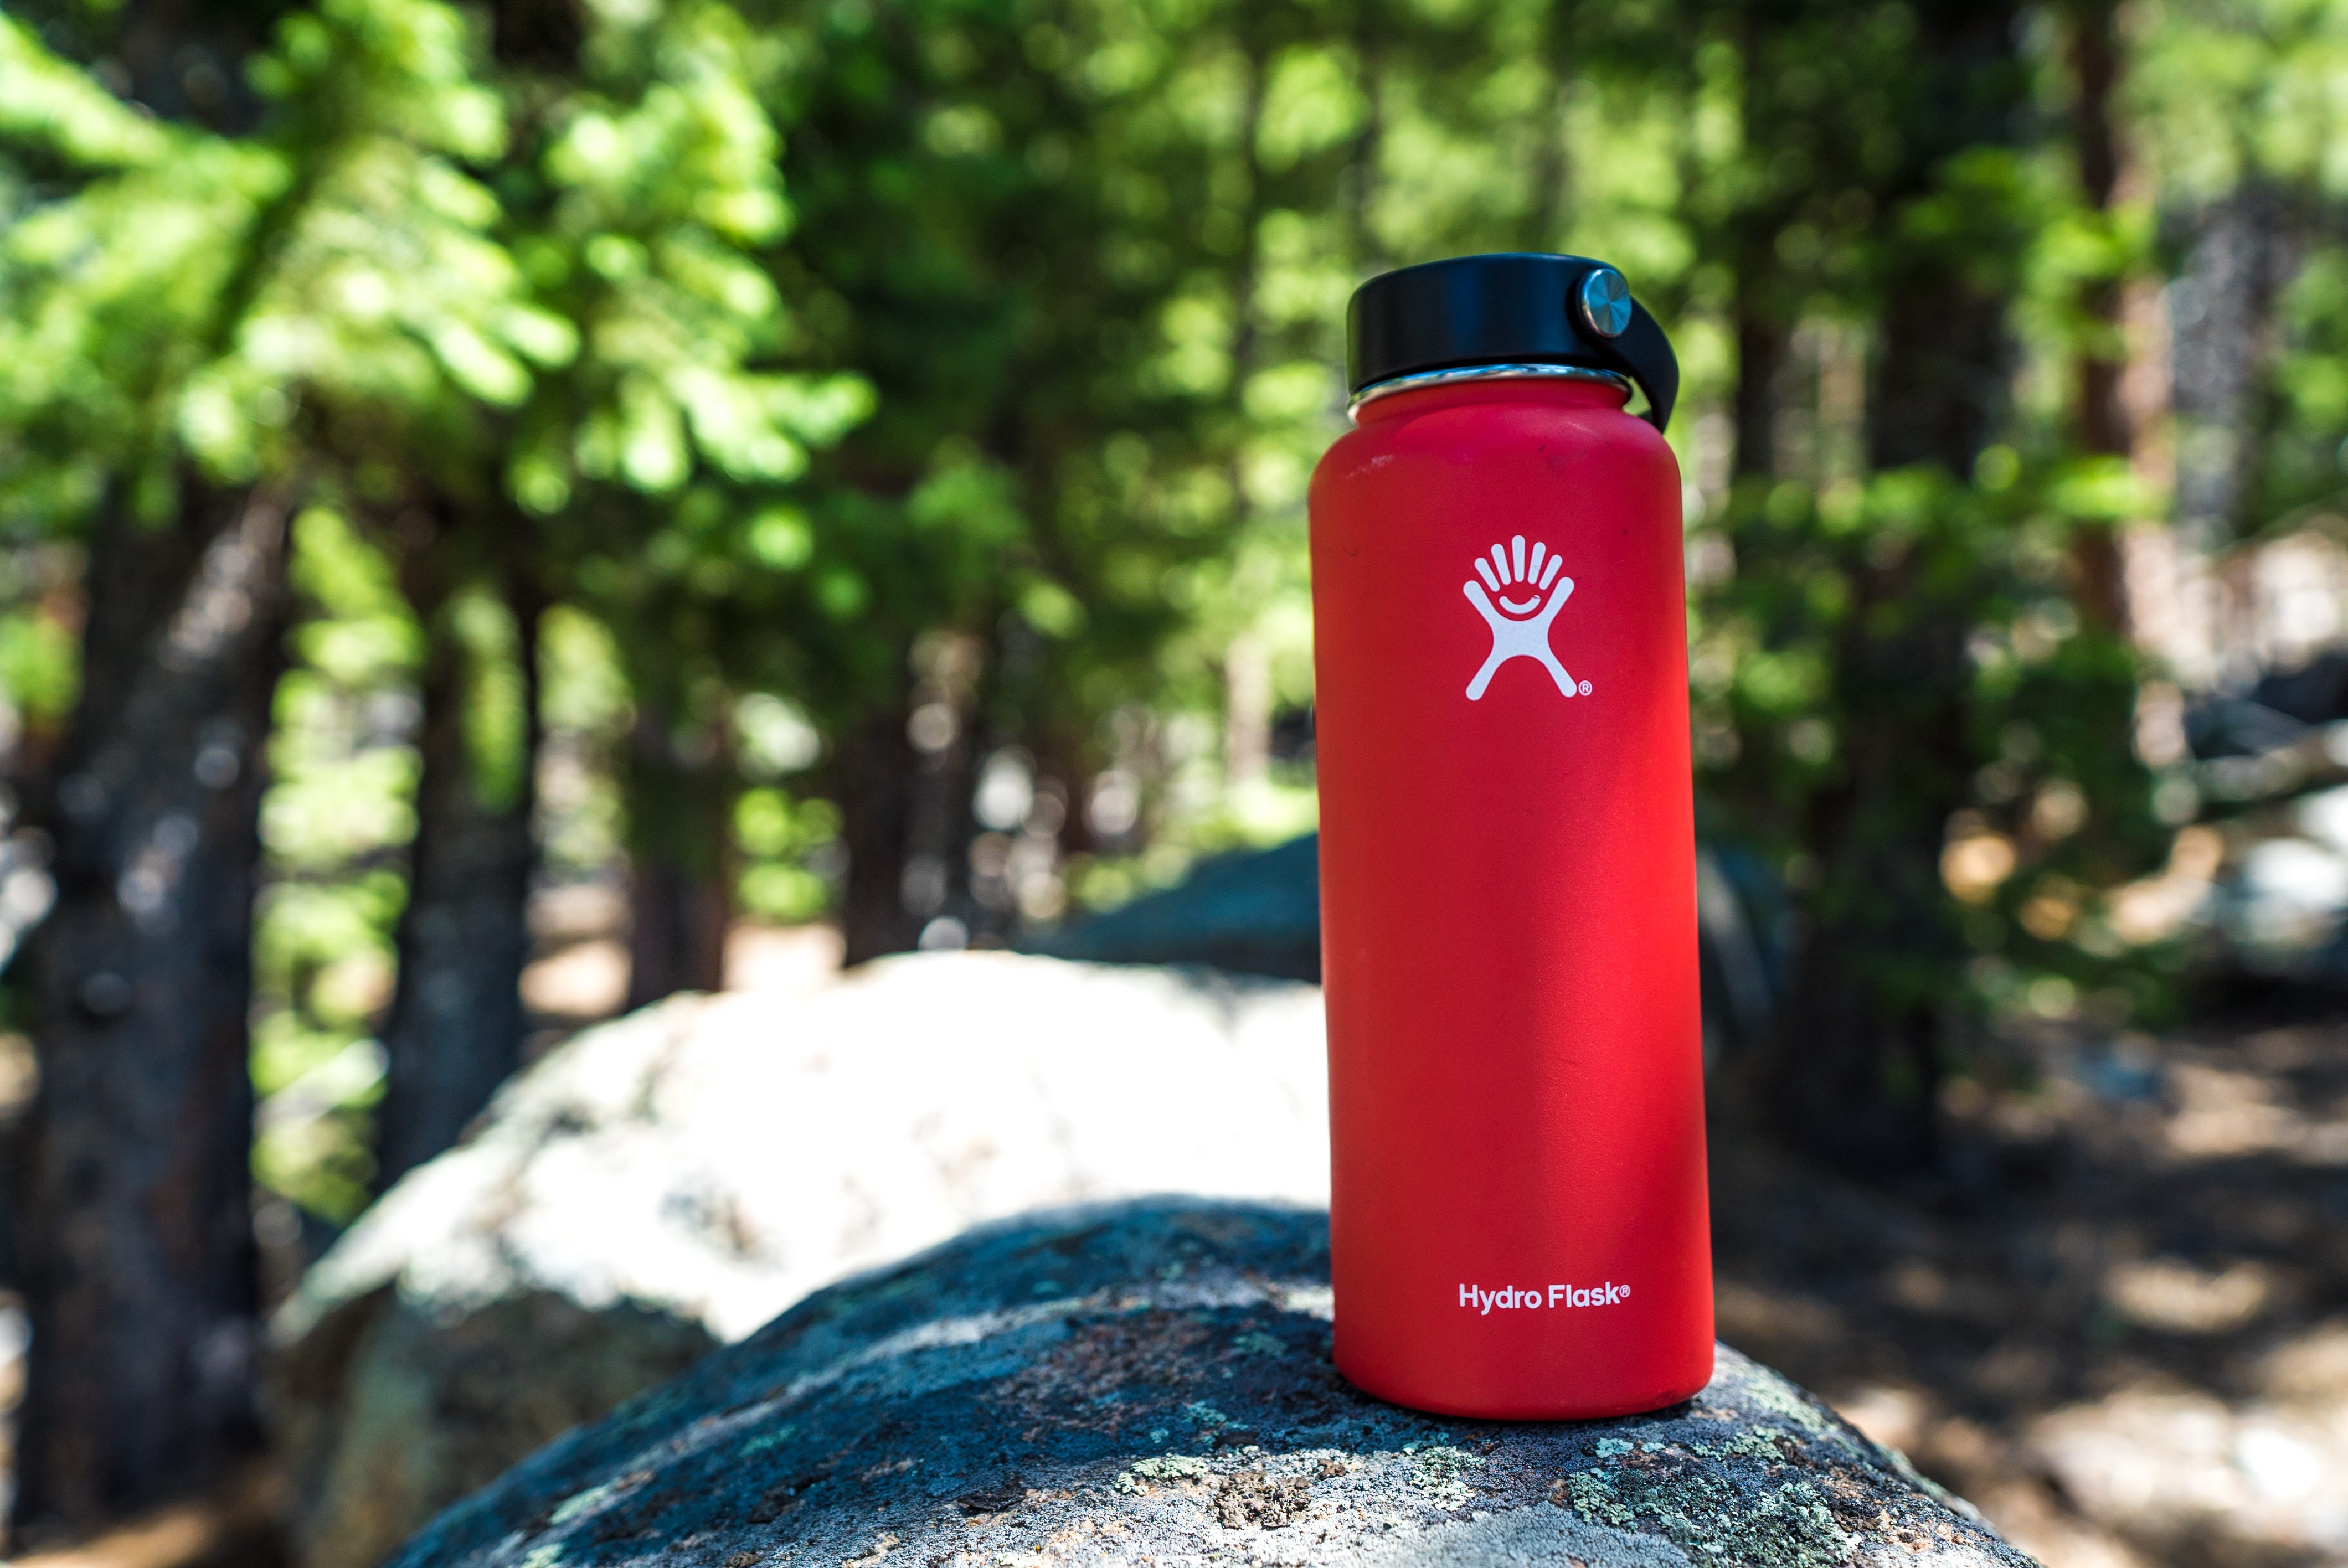 How Hydroflask used Instagram 